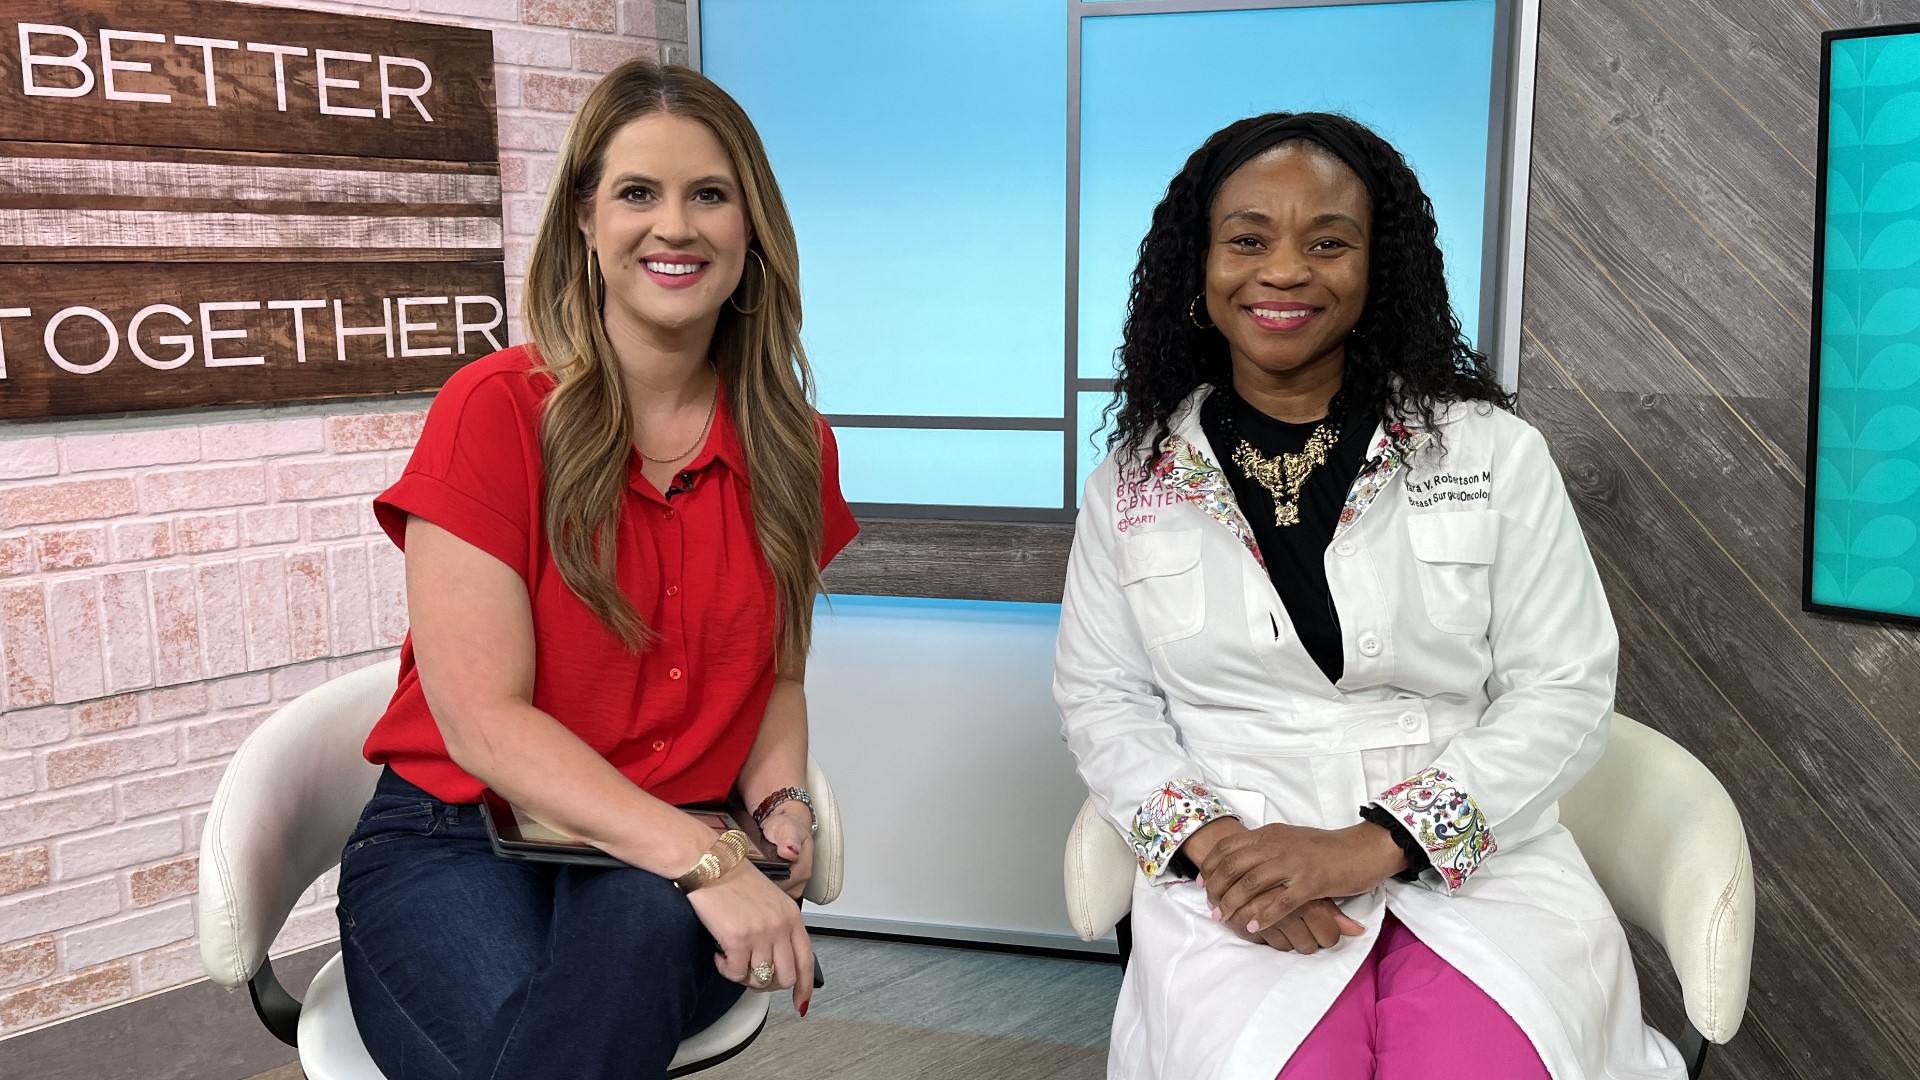 Yara Robertson, MD.,F.A.C.S. explains the mortality gap for Black women diagnosed with breast cancer.  She also shares why early detection is important.